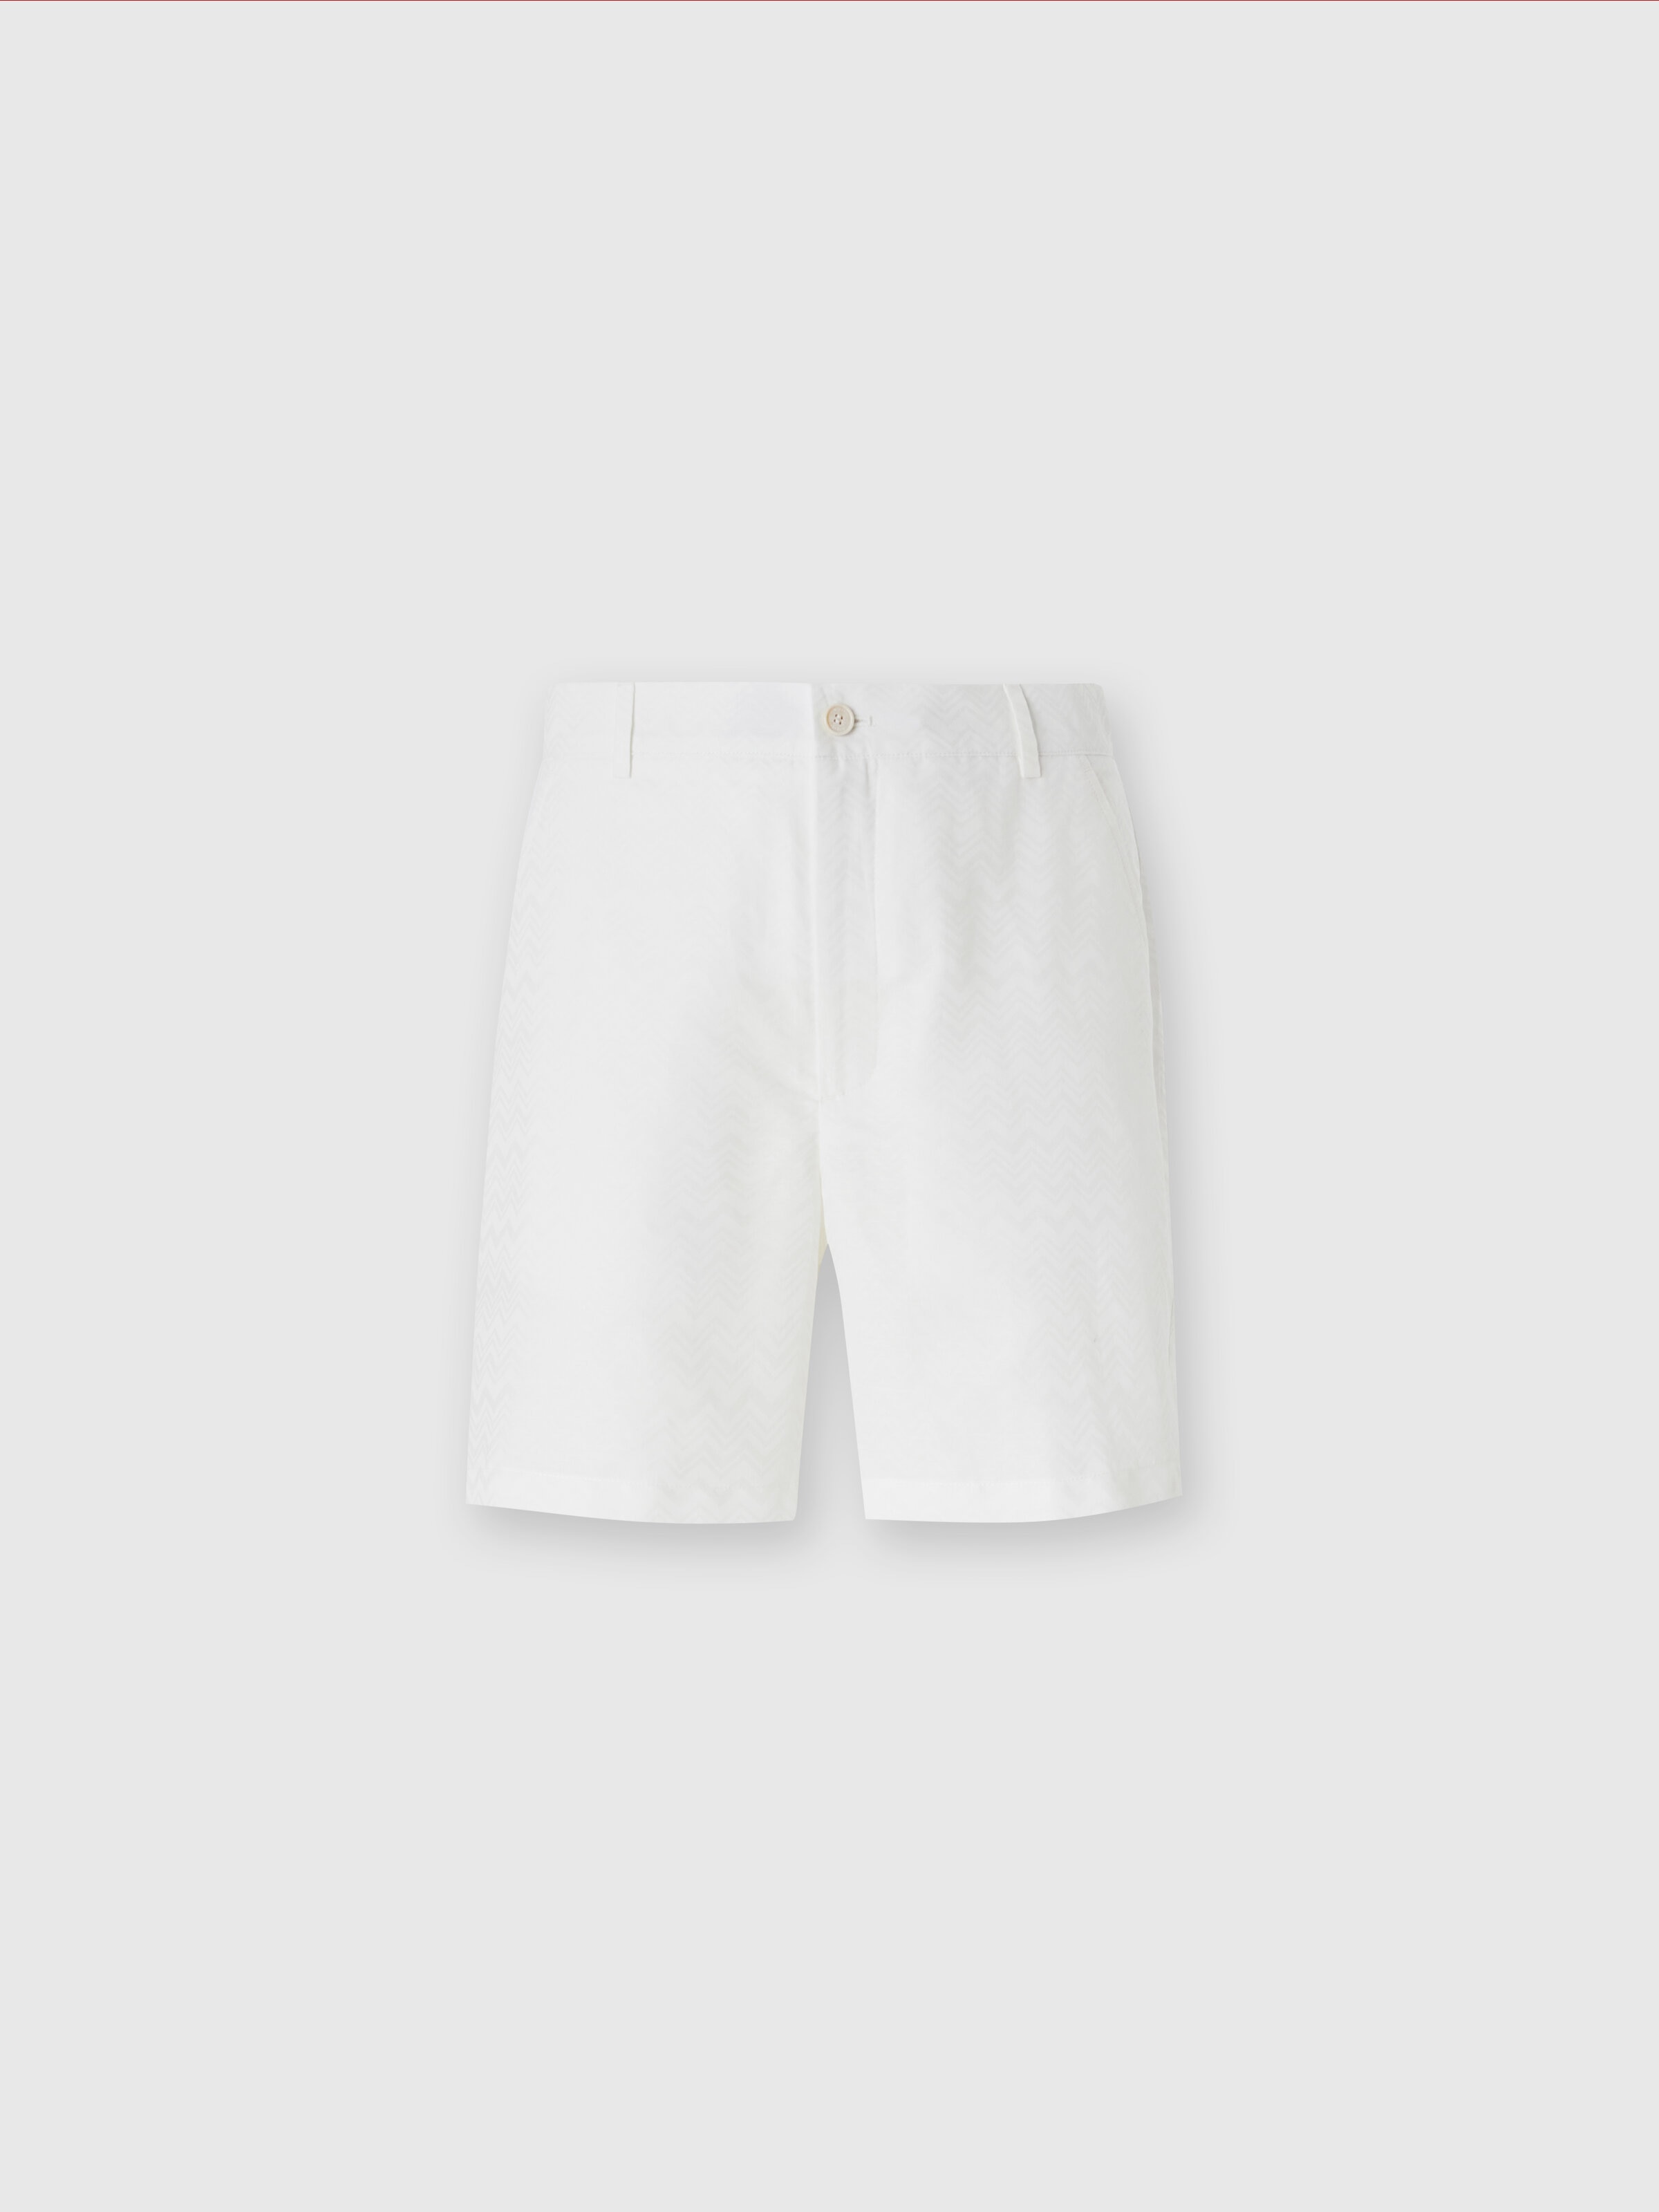 Bermuda shorts in cotton blend with zigzag pattern, White  - 0